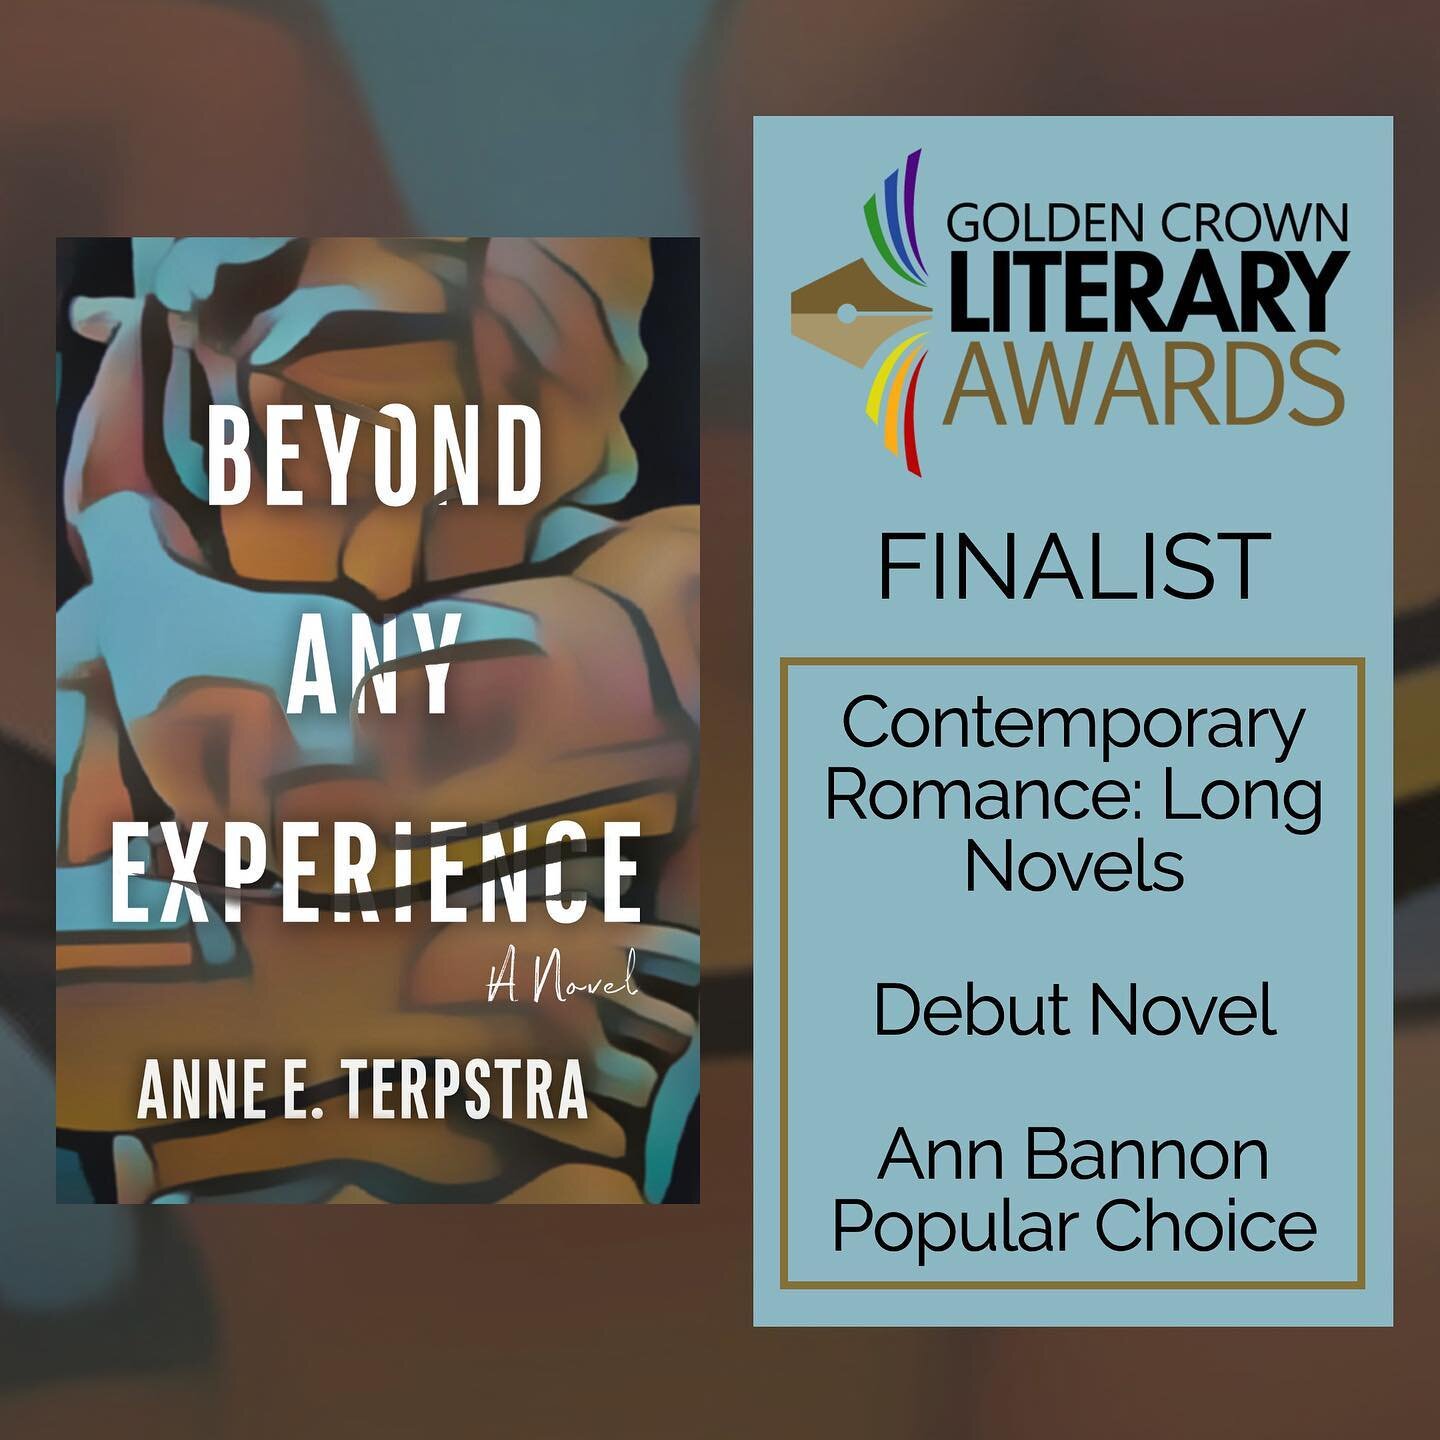 It&rsquo;s been a wonderful week for good book news - my novel, Beyond Any Experience, is a finalist in all three categories it was nominated in for the GCLS Goldie awards!

#BeyondAnyExperience #LGBTQBooks #QueerBookstagram #LesbianRomance #QueerLit